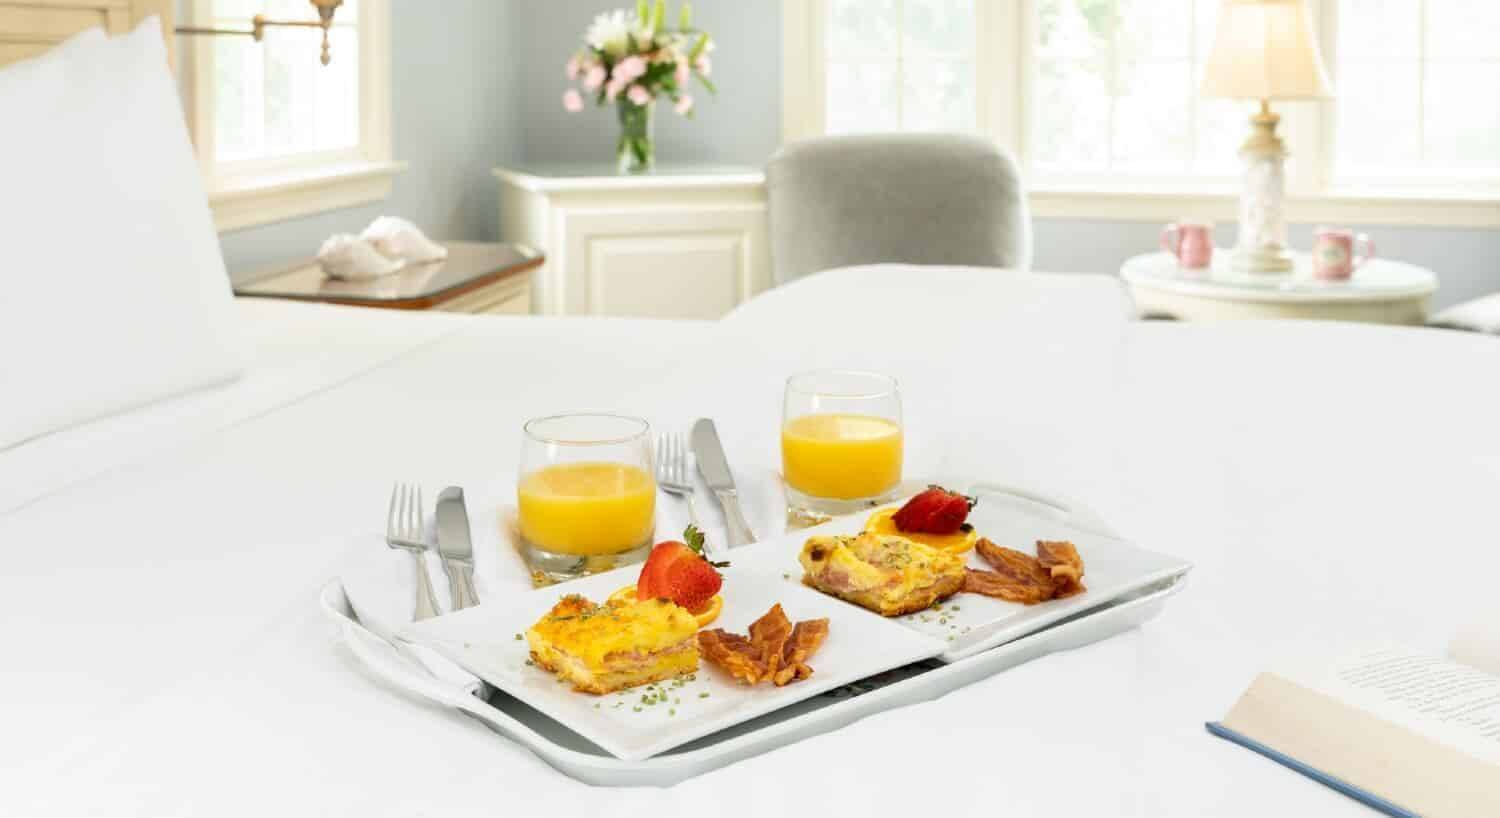 Breakfast tray with two plates of food, two glasses of orange juice and silverware on a bed with white linens